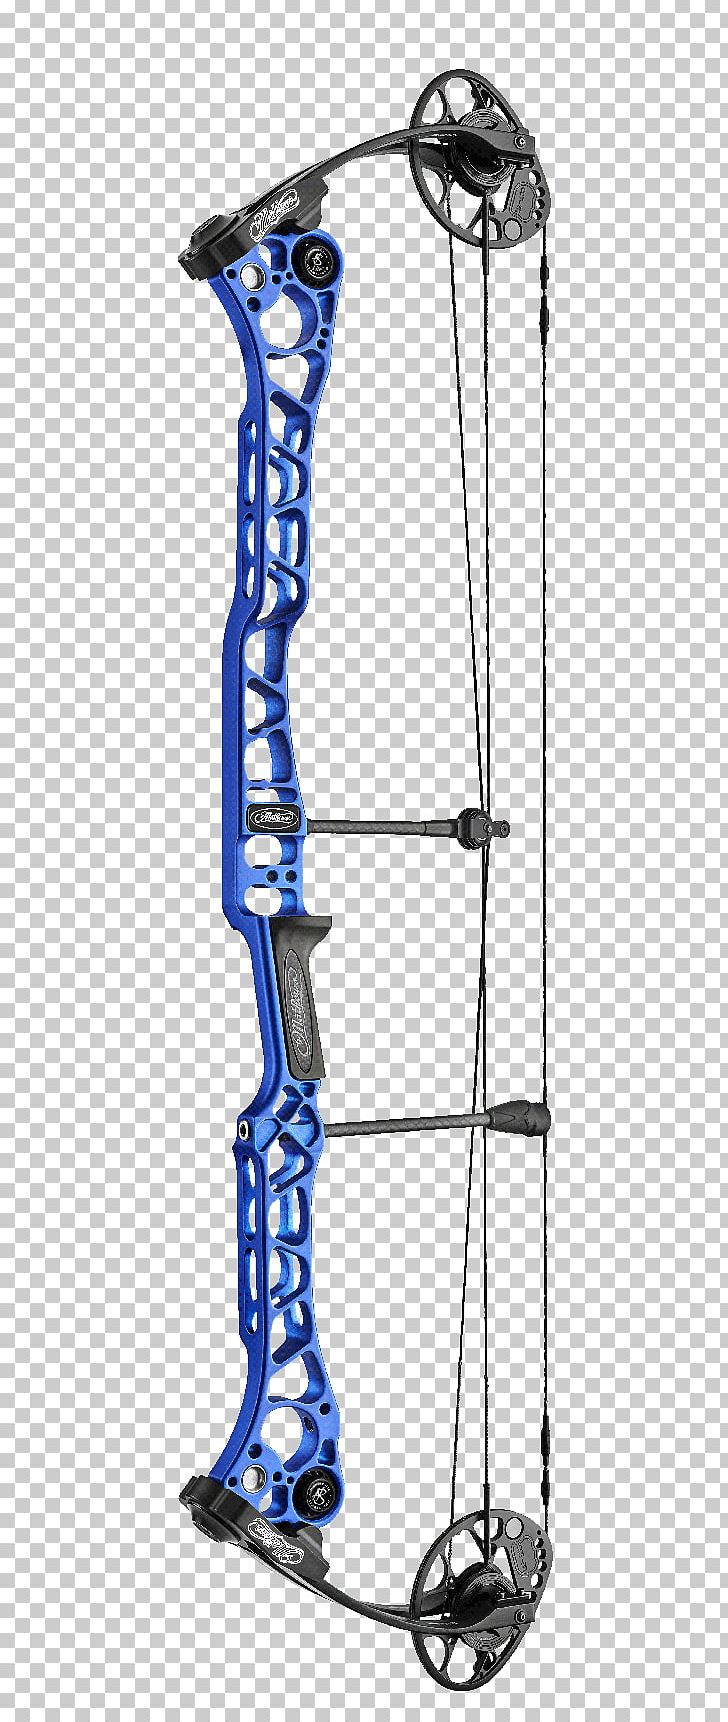 Compound Bows Bow And Arrow World Archery Federation PNG, Clipart, Advanced Archery, Archery, Arrow, Benson Archery, Blue Free PNG Download